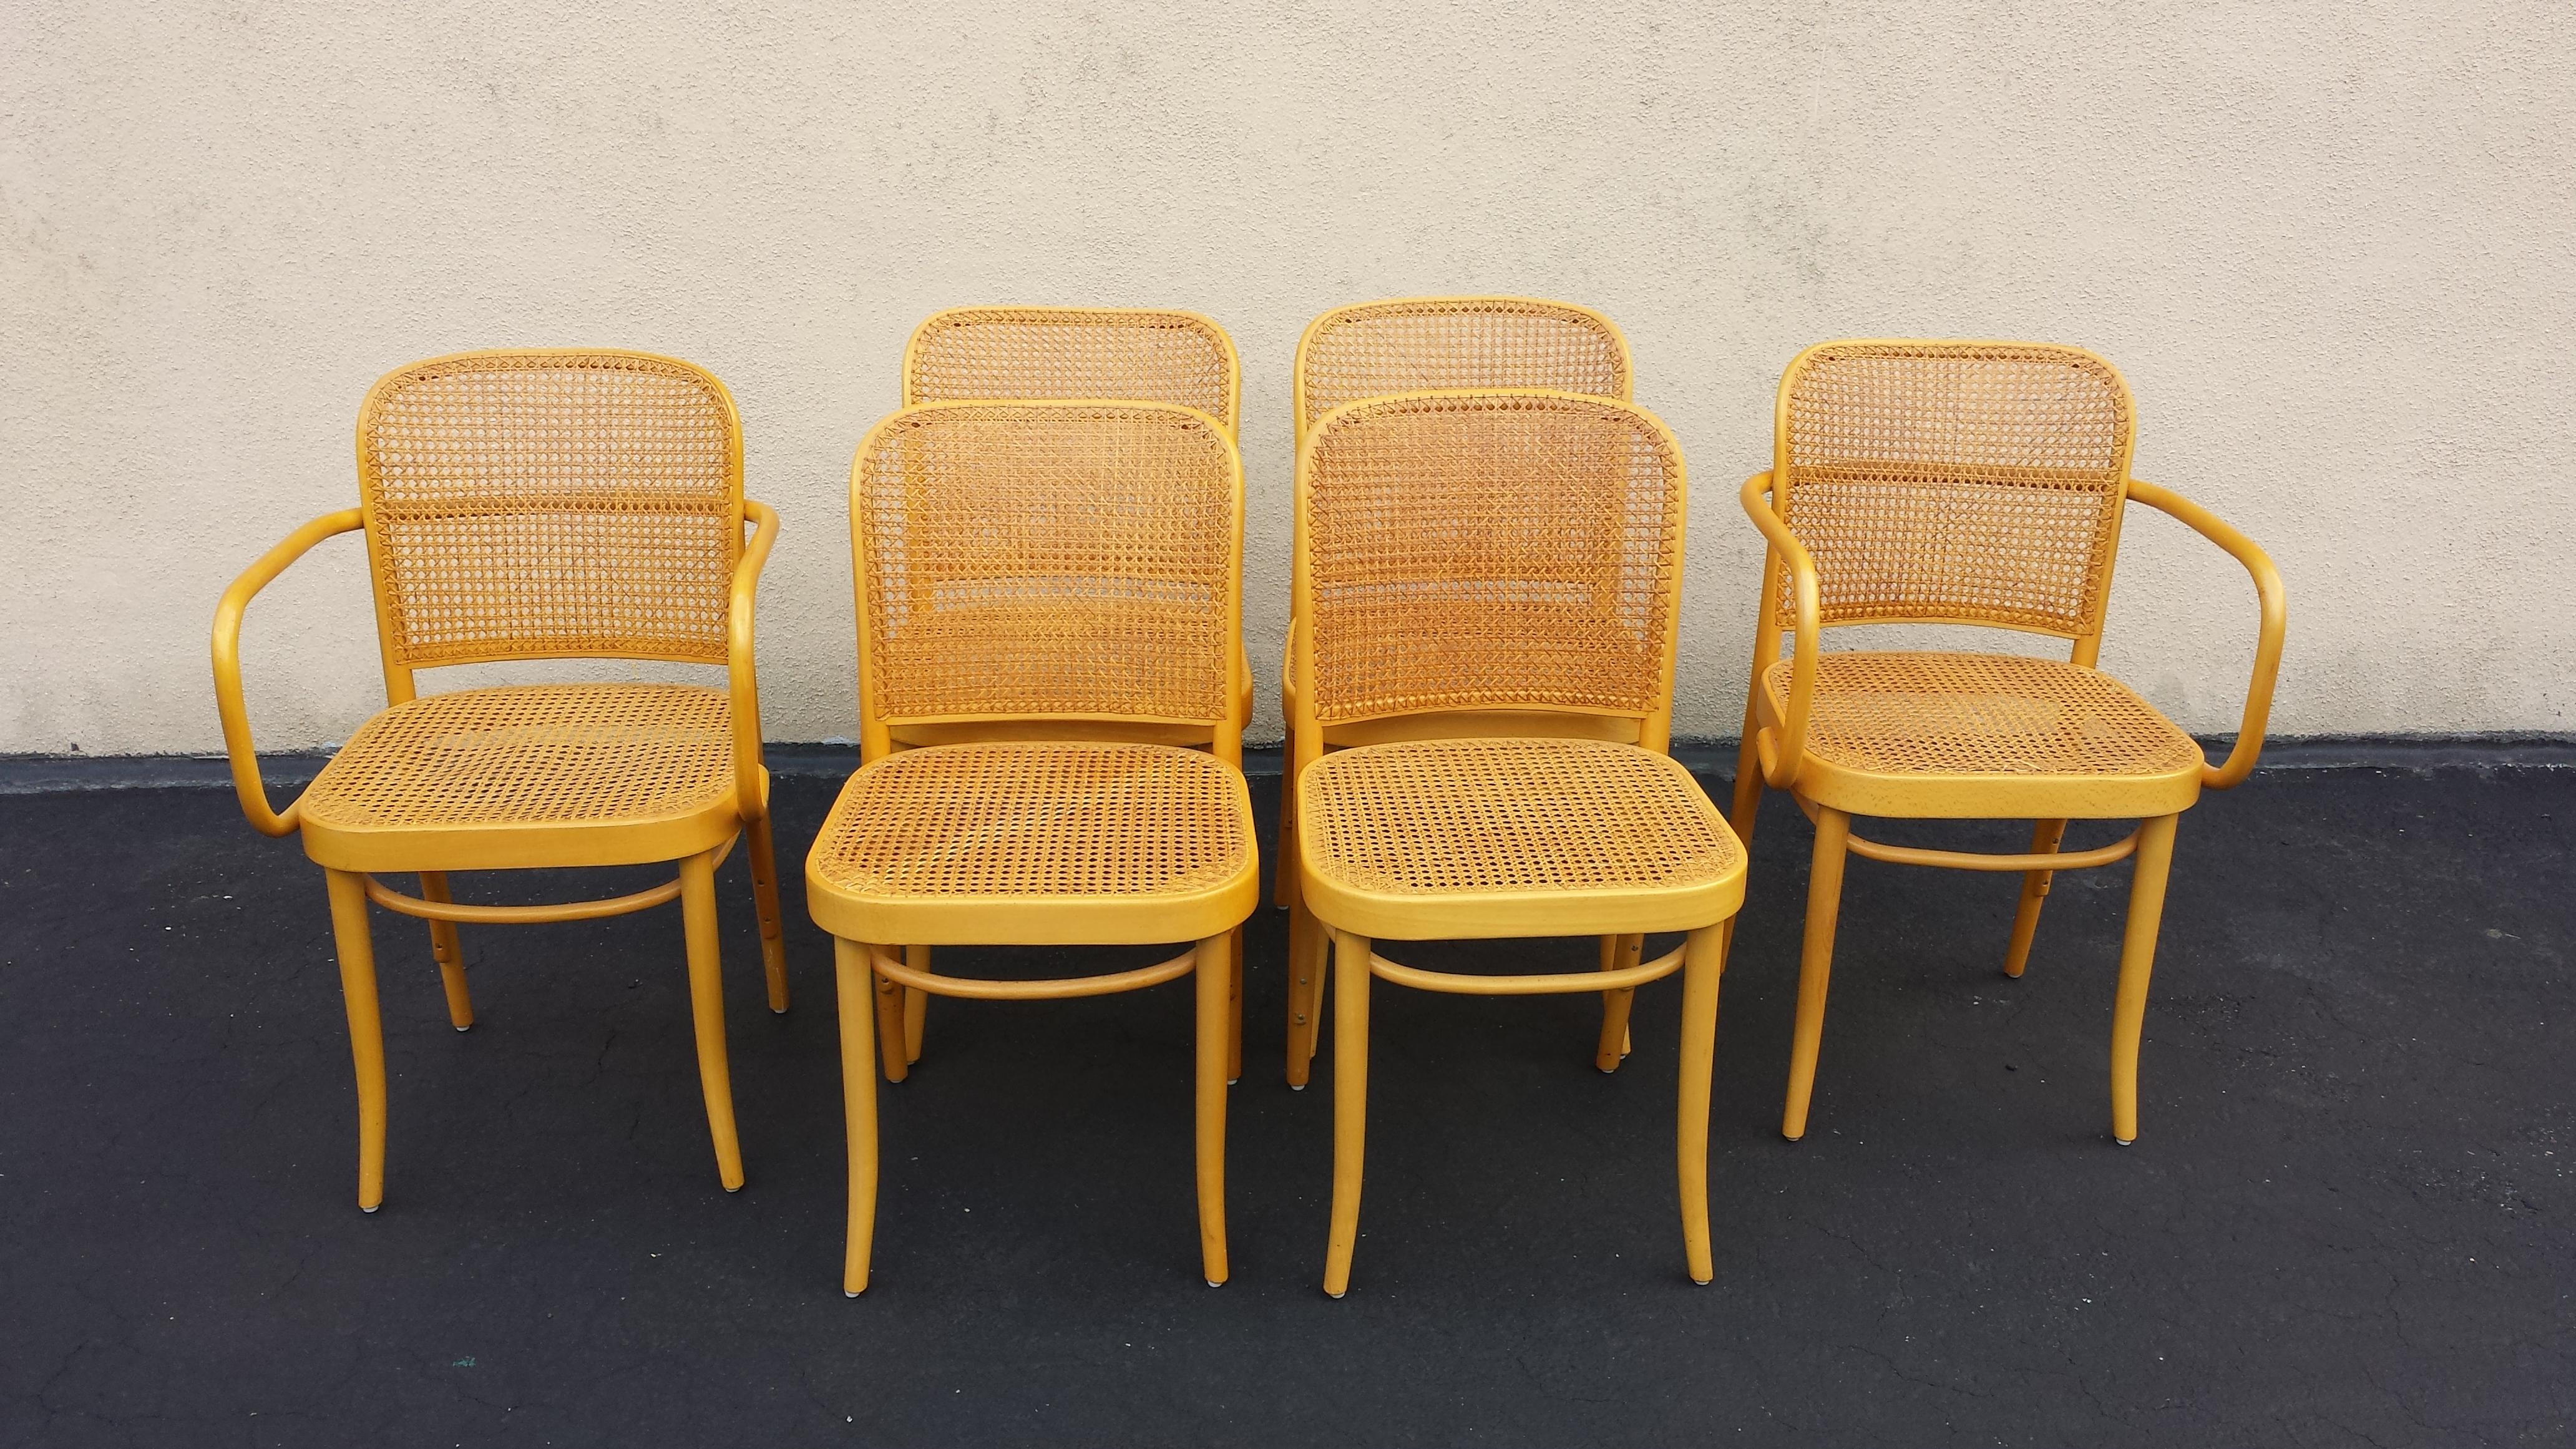 Gorgeous set of Antique Josef Hoffmann bentwood and cane chairs. Made in Poland. Set of 6. 4 side chairs 2 armchairs. Very good condition for age exhibiting minimal wear.

Complimentary free delivery is available for this item in NYC and surrounding